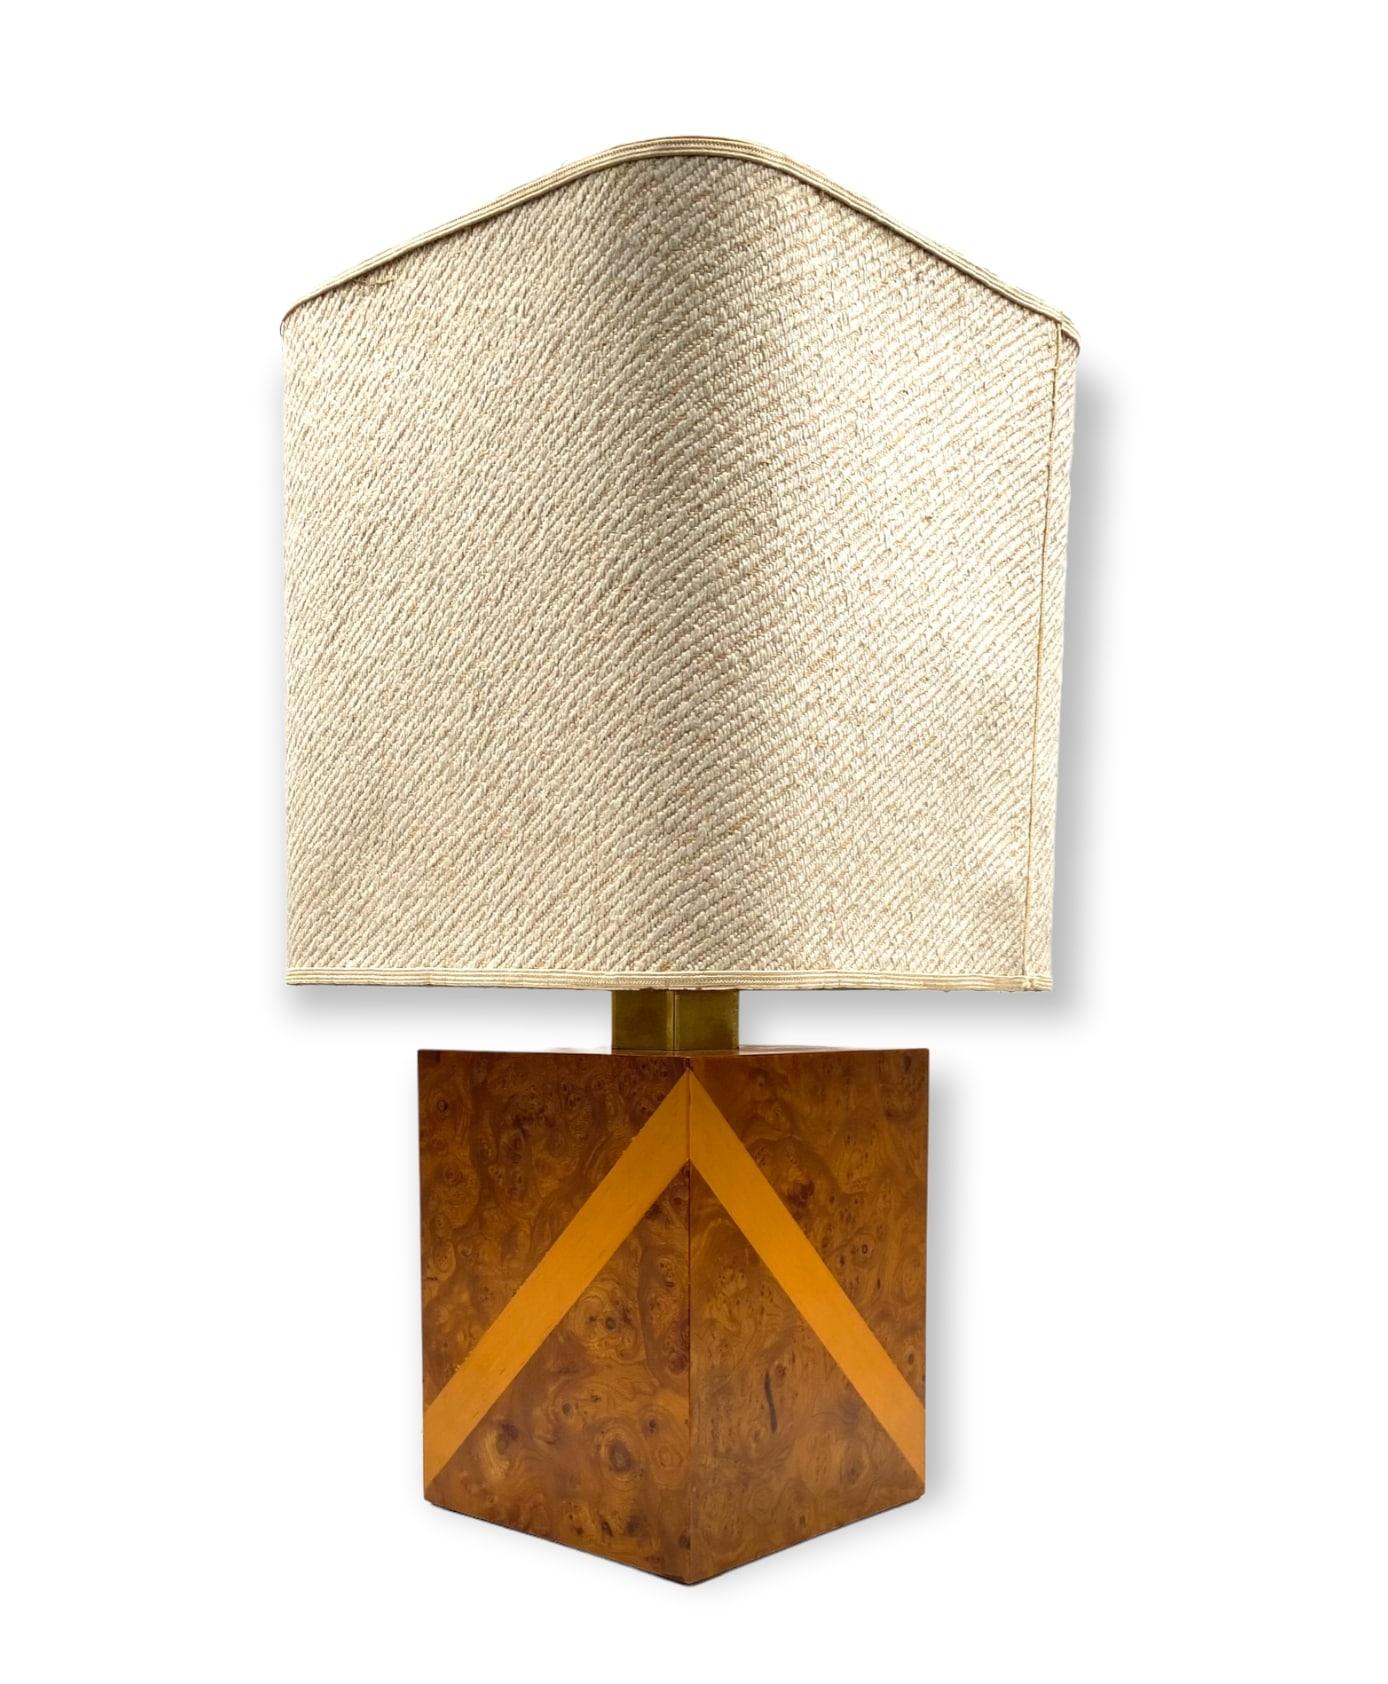 Hollywood Regency Cubic Wood and Brass Table Lamp, Italy, 1970s For Sale 7